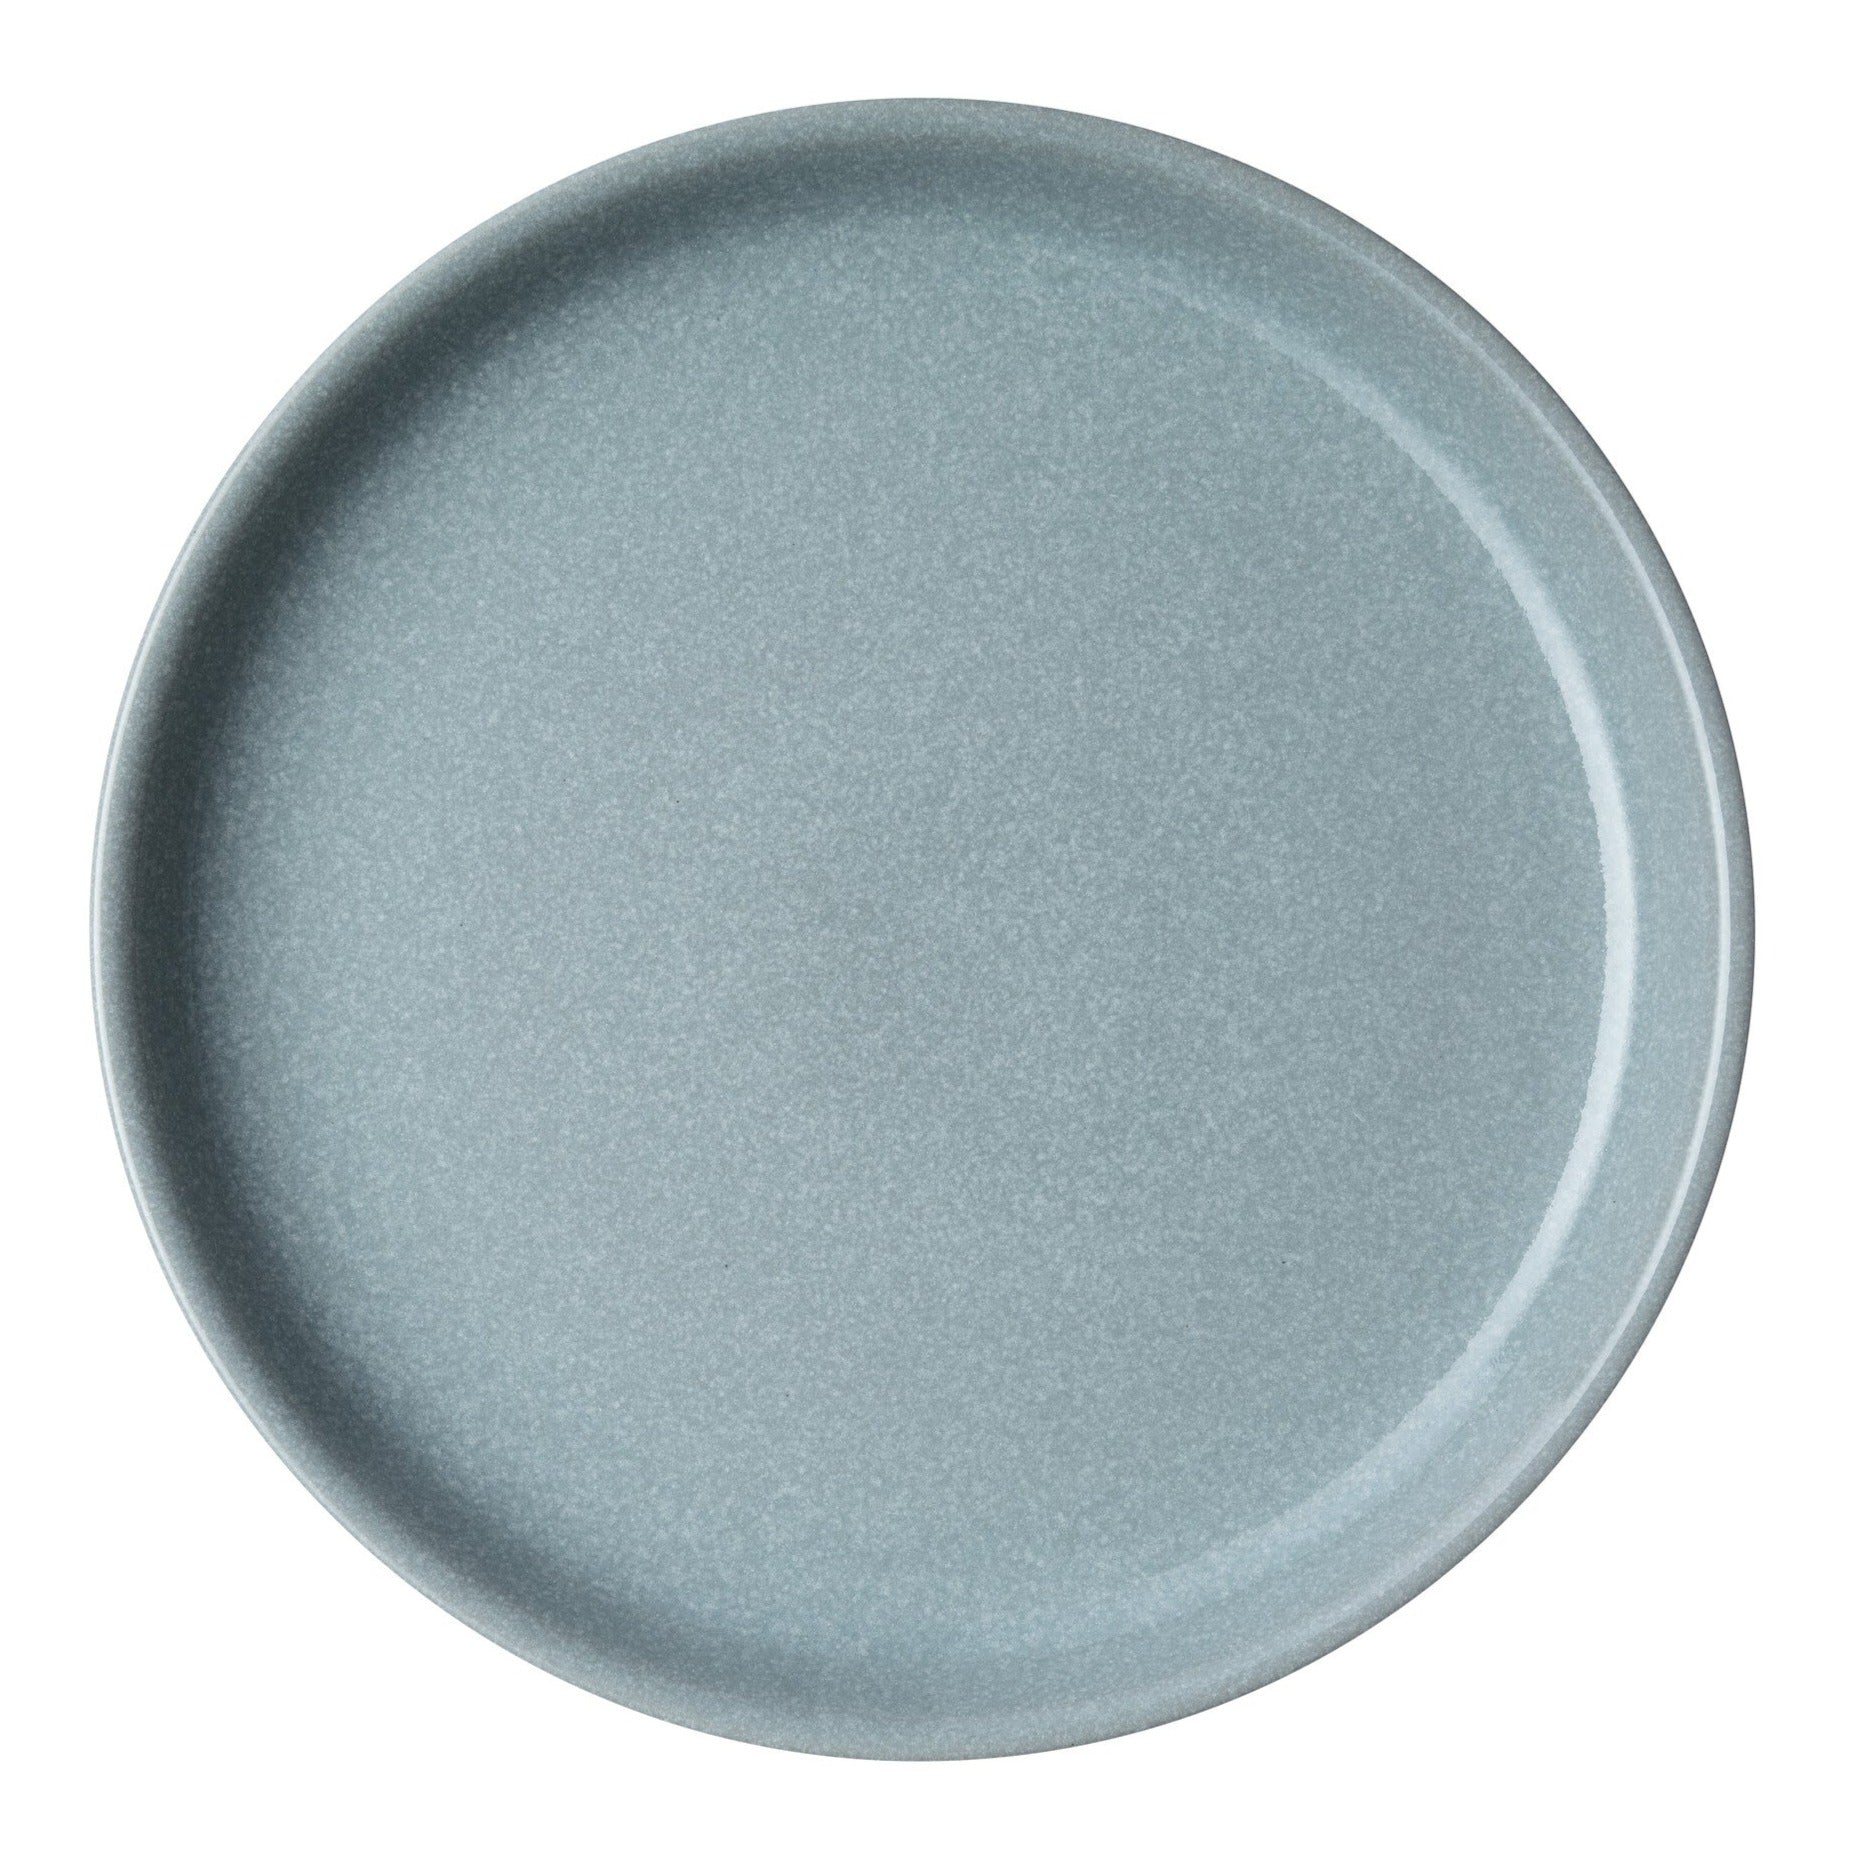 Denby Elements Light Grey Coupe Dinner Plate